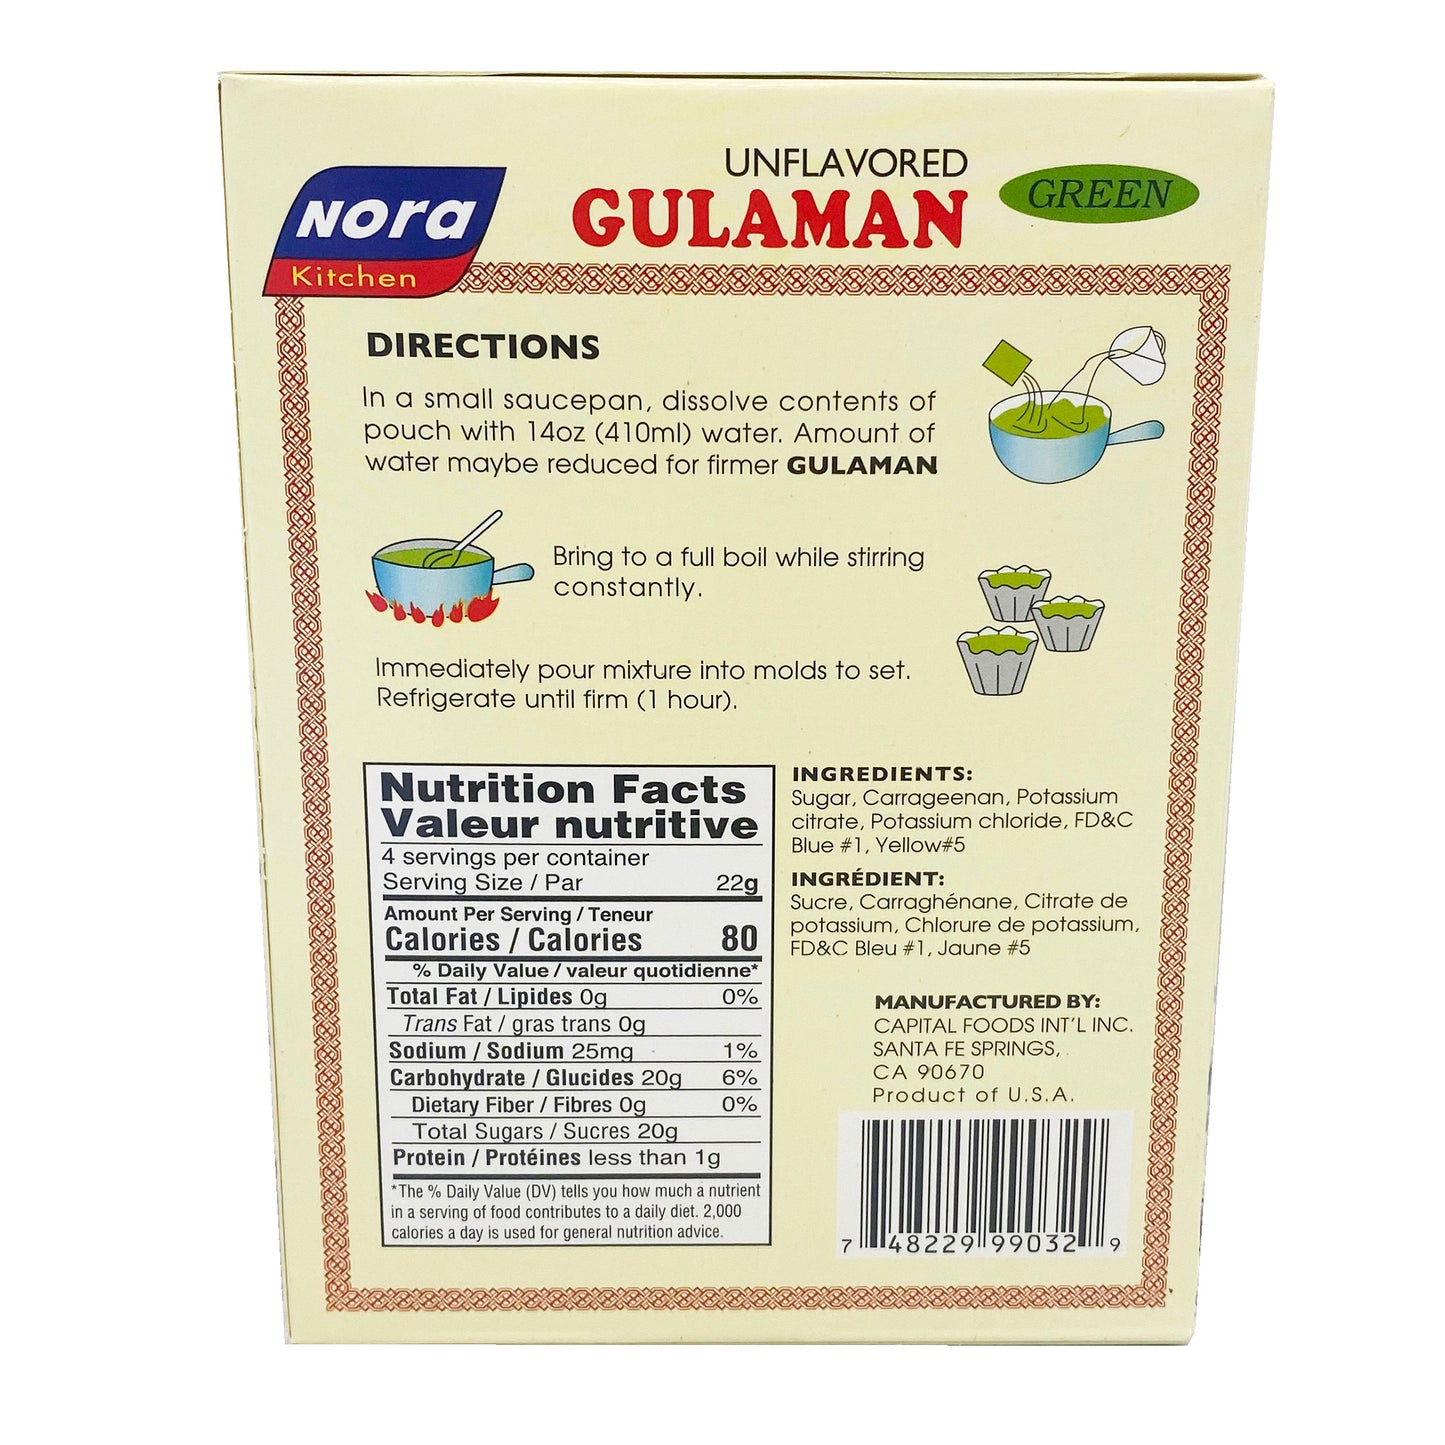 Back graphic image of Nora Kitchen Unflavored Gulaman - Green 3.17oz